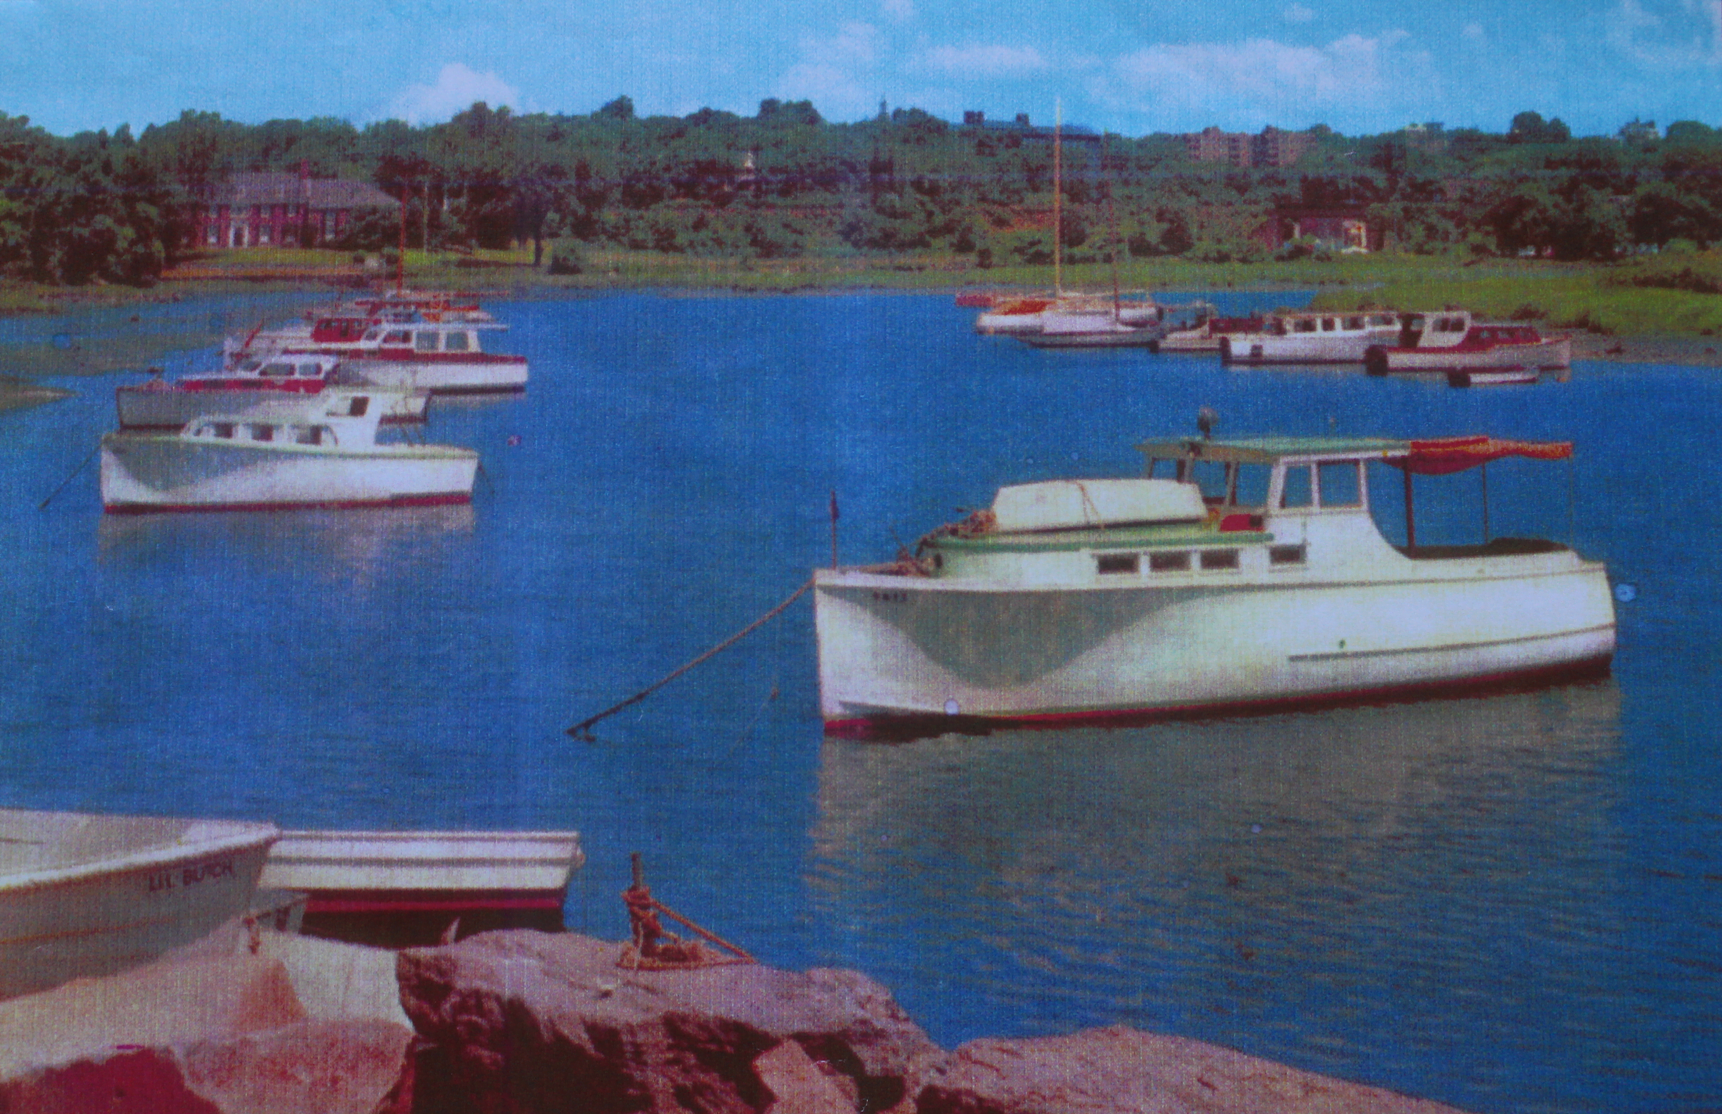 Postcard of northern most Greenwich Harbor from 1948 of Greenwich Harbor, prior to I95 (see Boys Club in background), prior to it being filled in from storms.